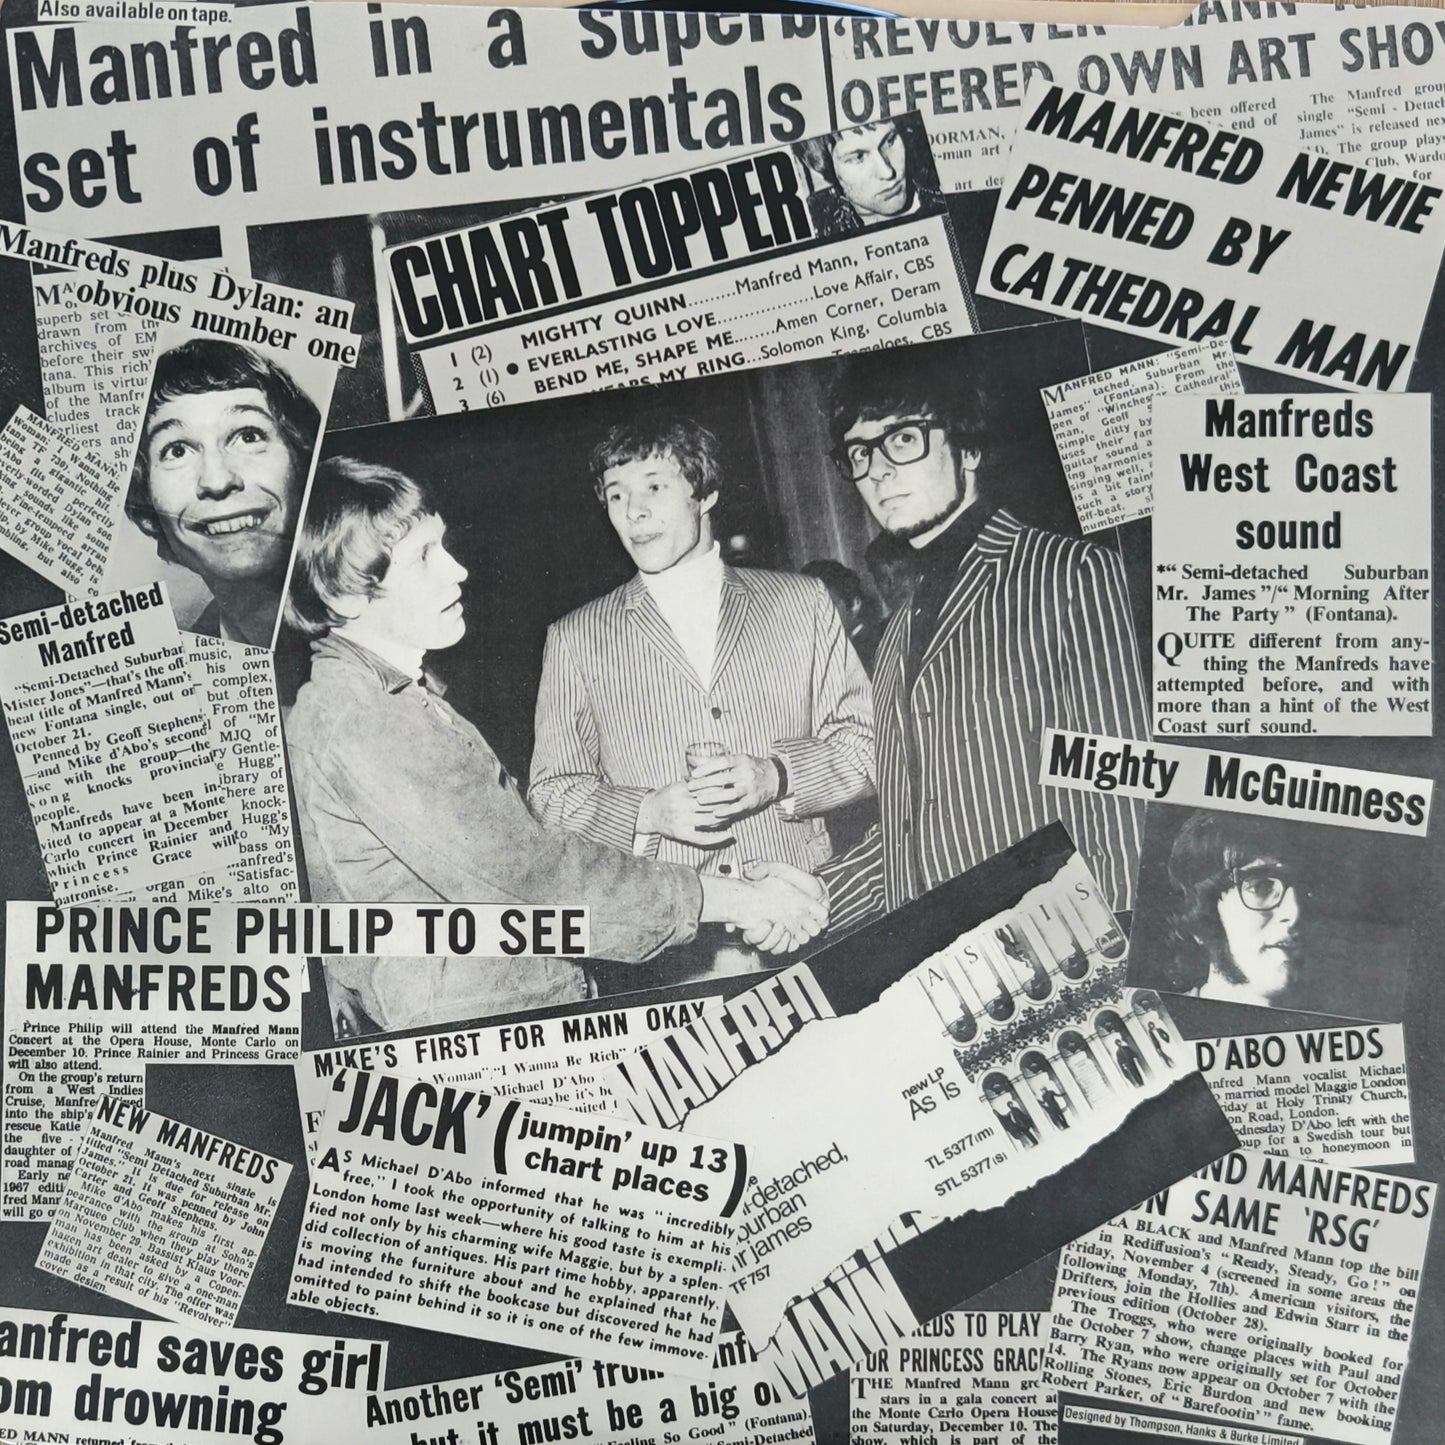 MANFRED MANN - Semi-Detached Suburban (20 Great Hits Of The Sixties)